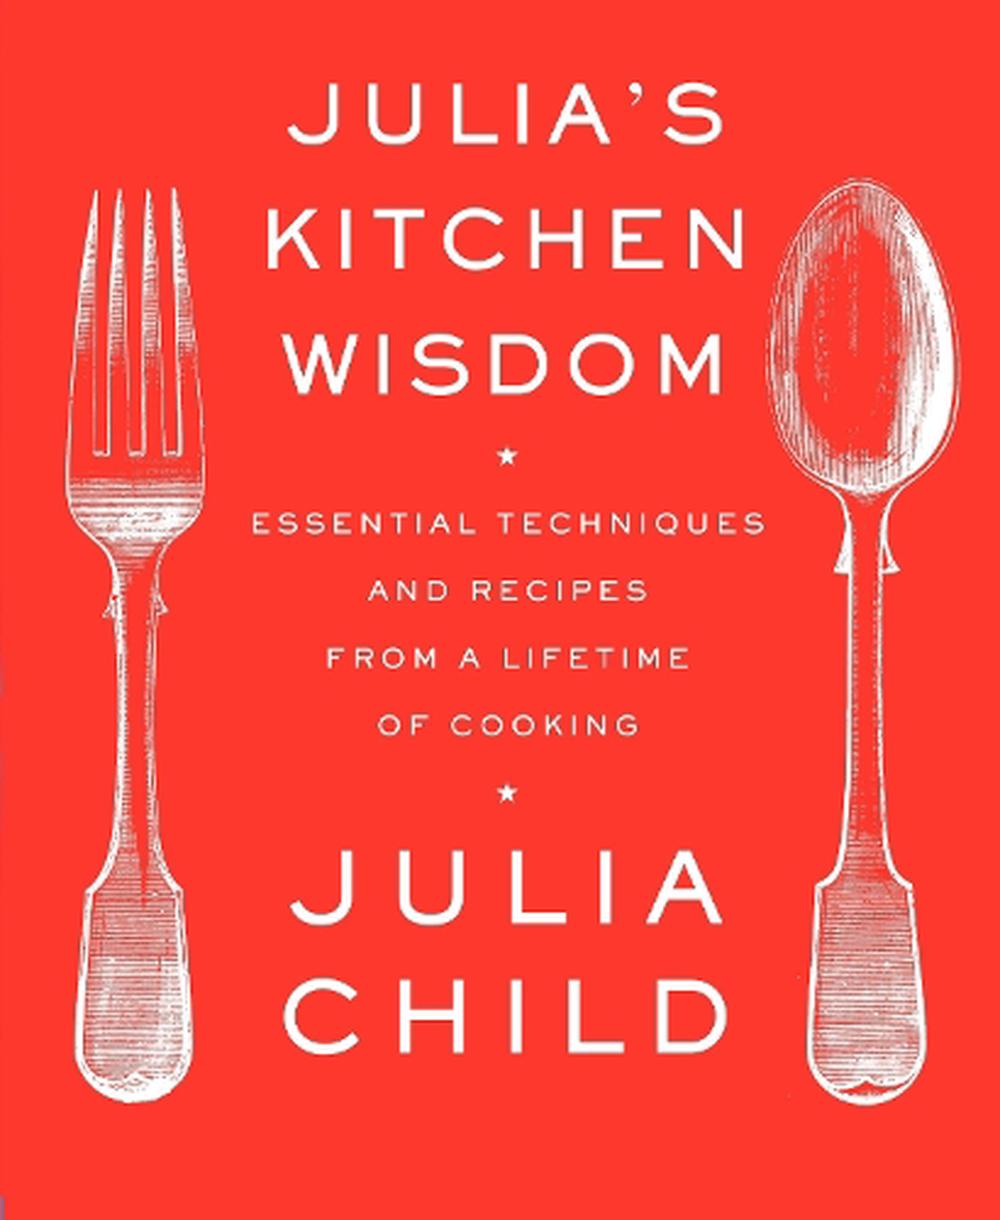 Julia's Kitchen Wisdom : Essential Techniques and Recipes from a Lifetime of Cooking: A Cookbook (Paperback) - image 1 of 1